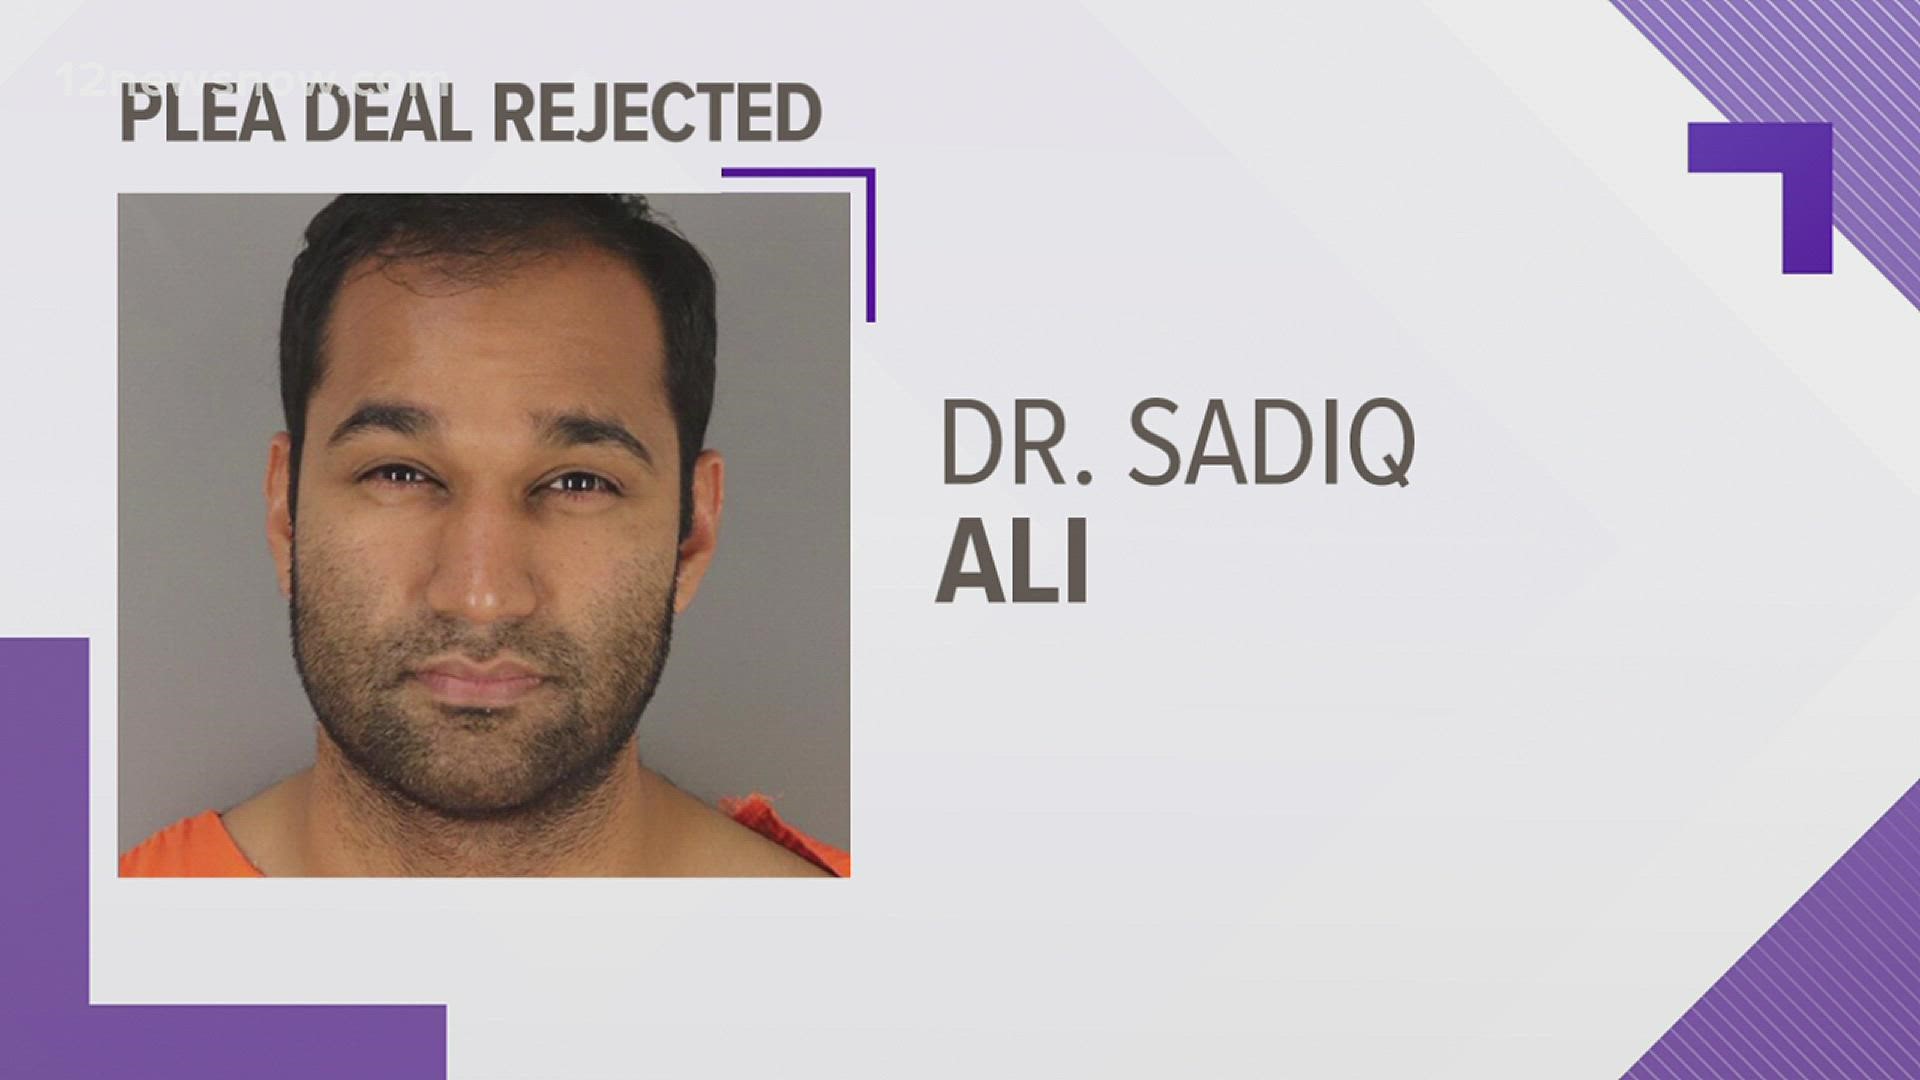 Dr. Saqid Ali would have had a 5-year sentencing limit if he had chosen to accept the plea deal. He faces up to 20 years if found guilty.